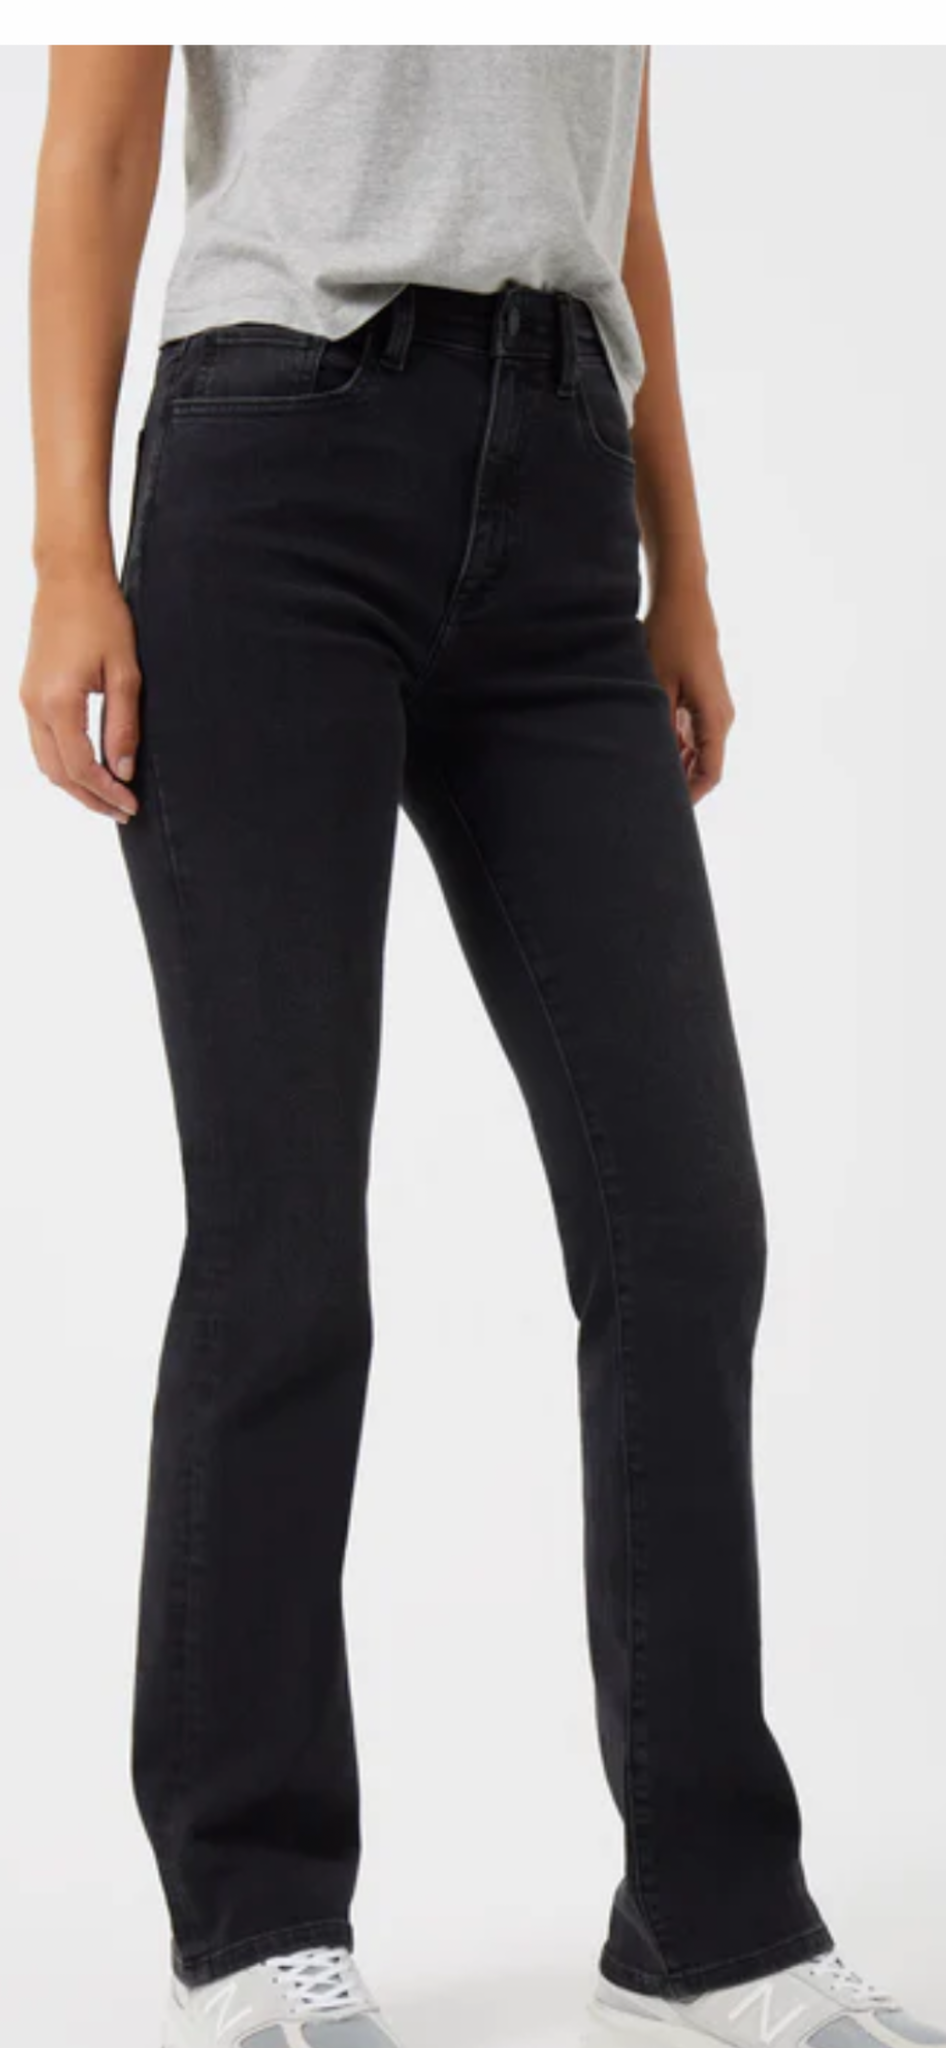 FRENCH CONNECTION - BLACK STRETCH DEMI-BOOT CUT JEANS